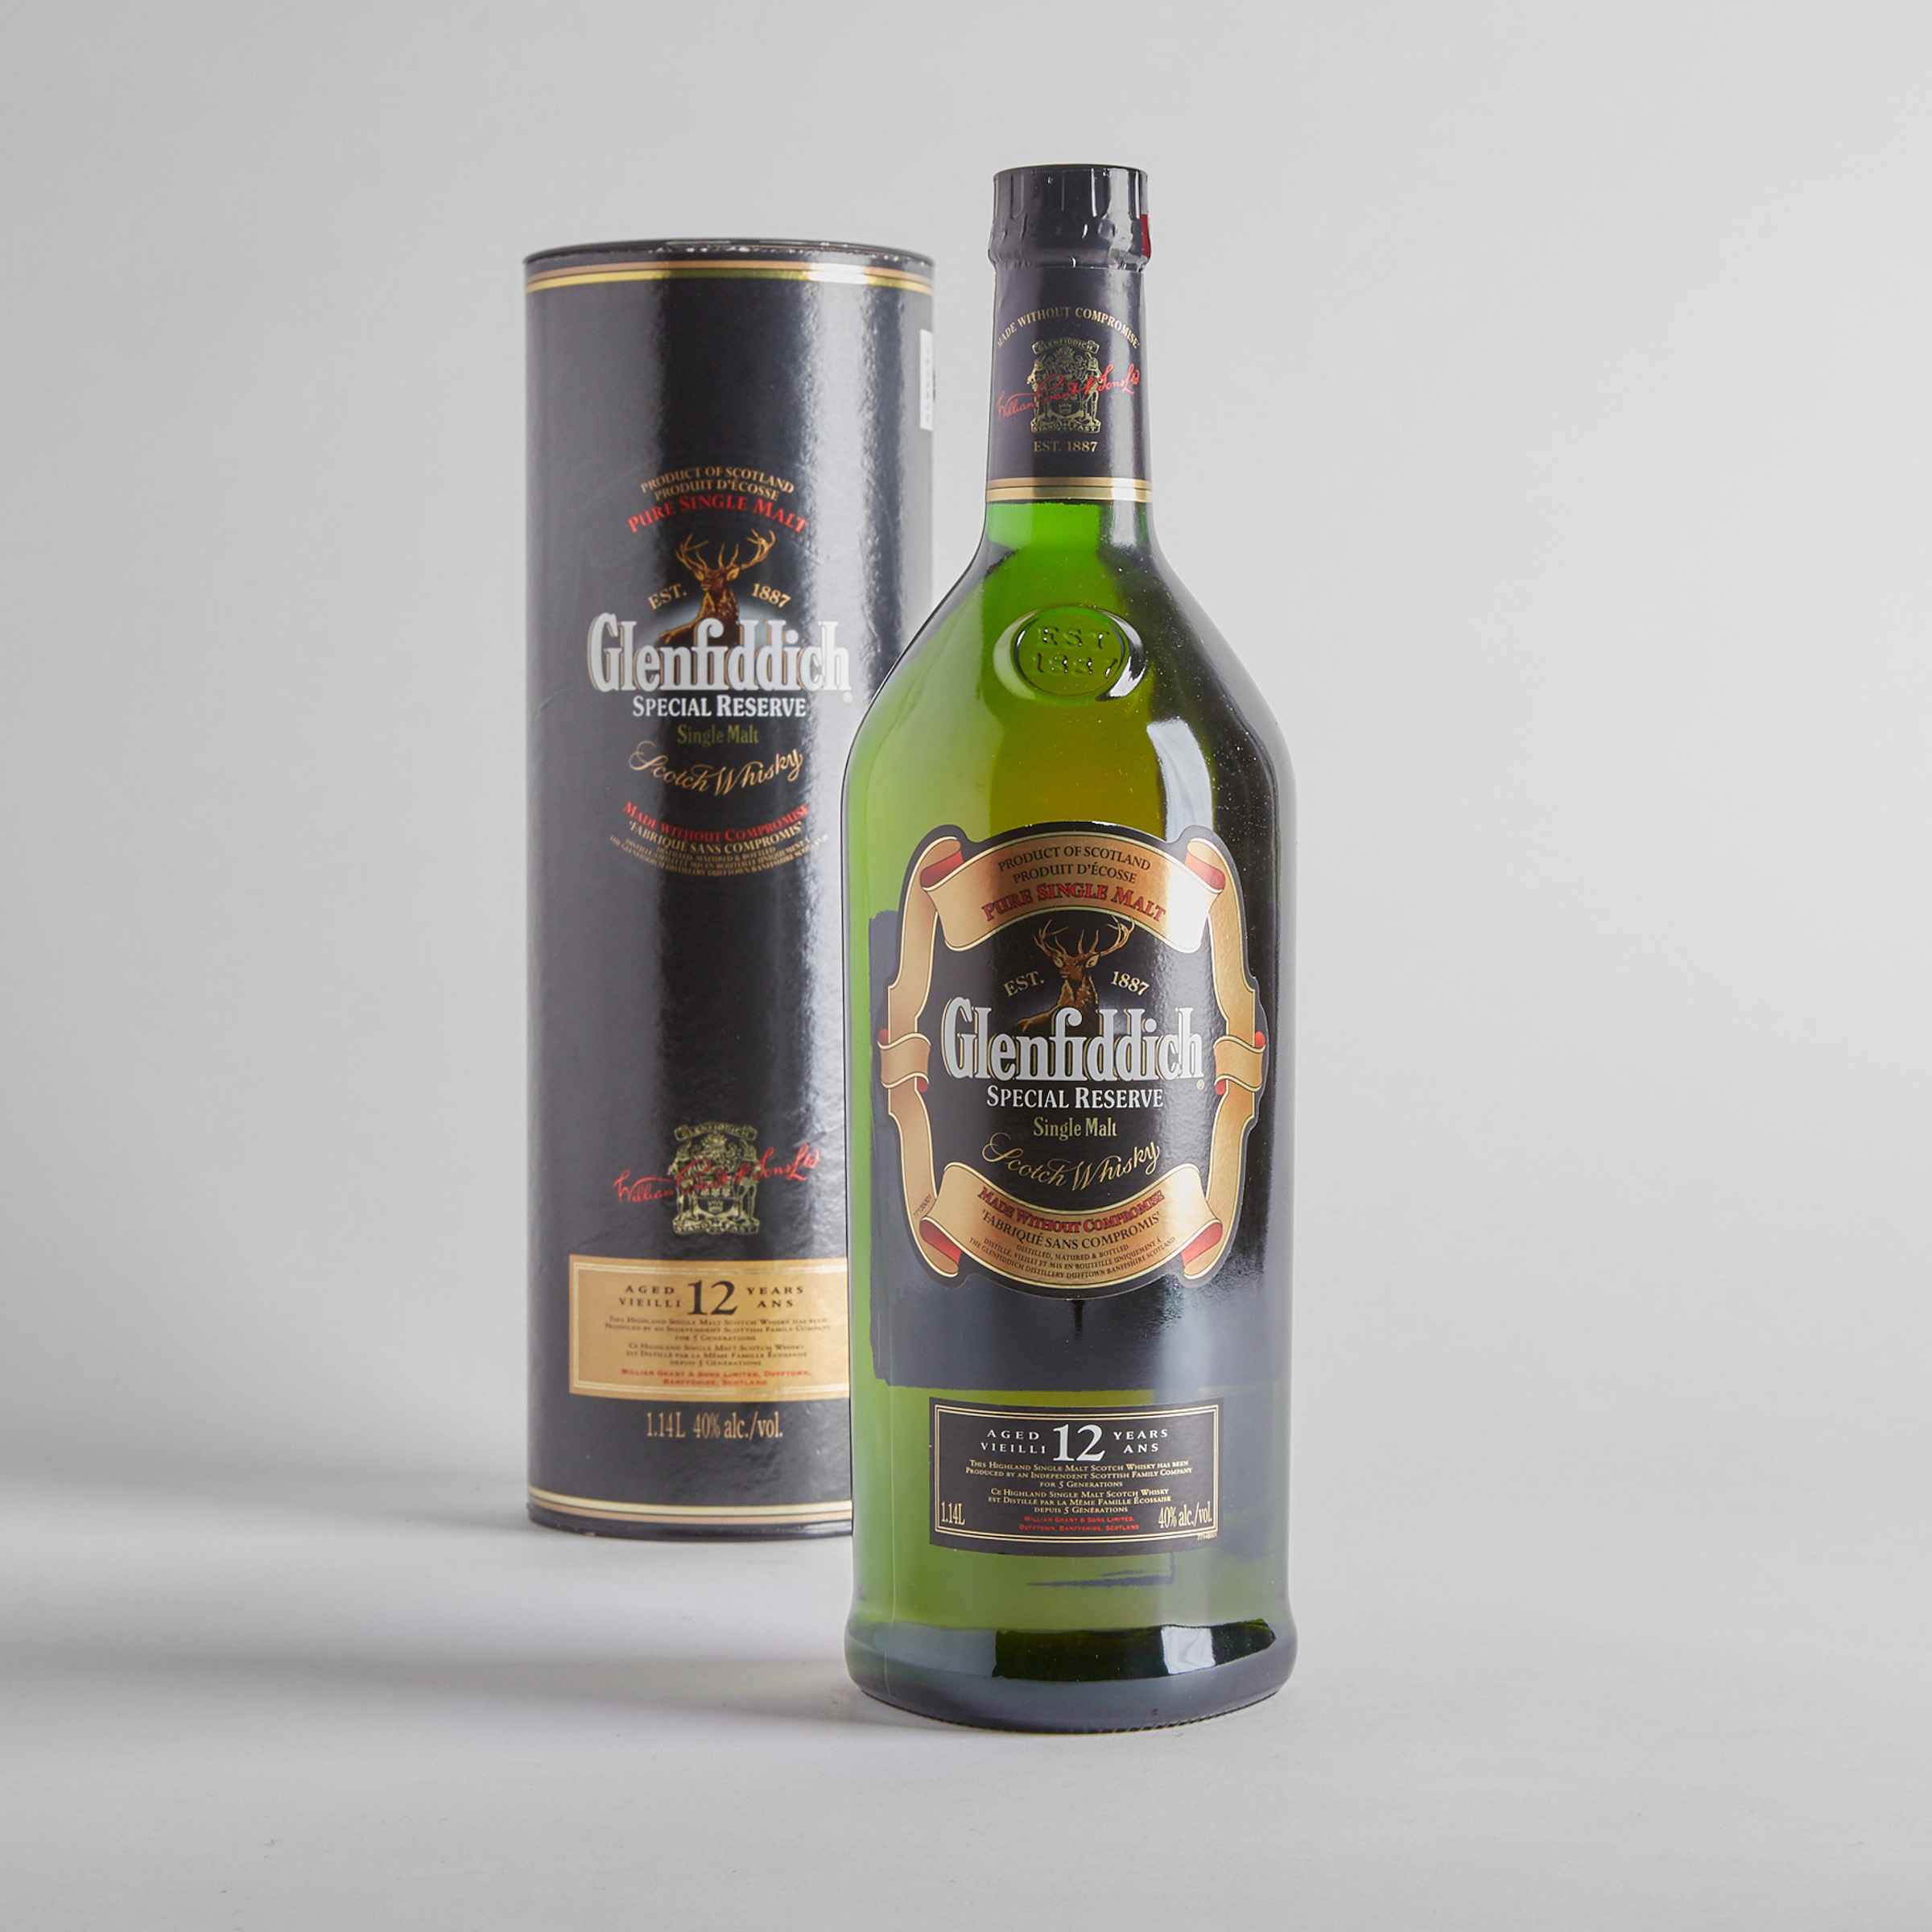 GLENFIDDICH SPECIAL RESERVE SINGLE MALT SCOTCH WHISKY 12 YEARS (ONE 1.14L)